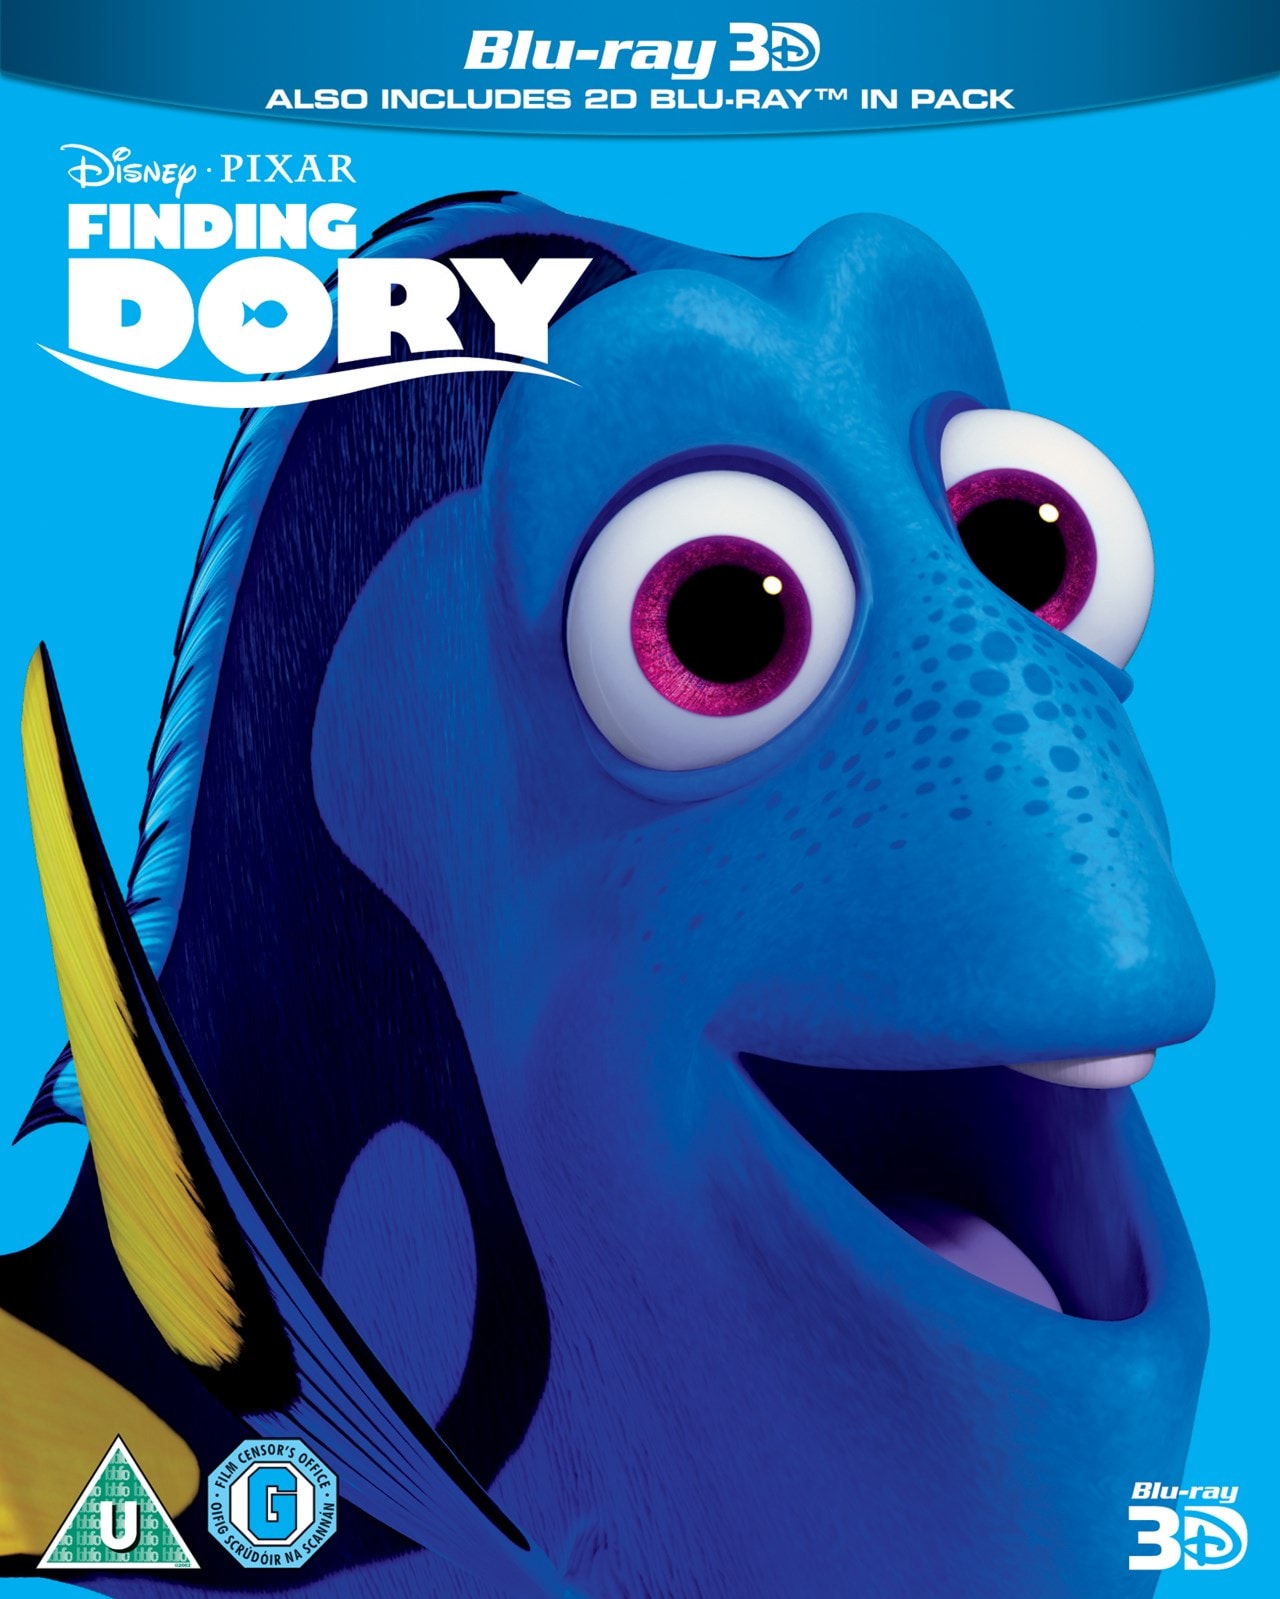 is there a free finding dory movie online no sign in